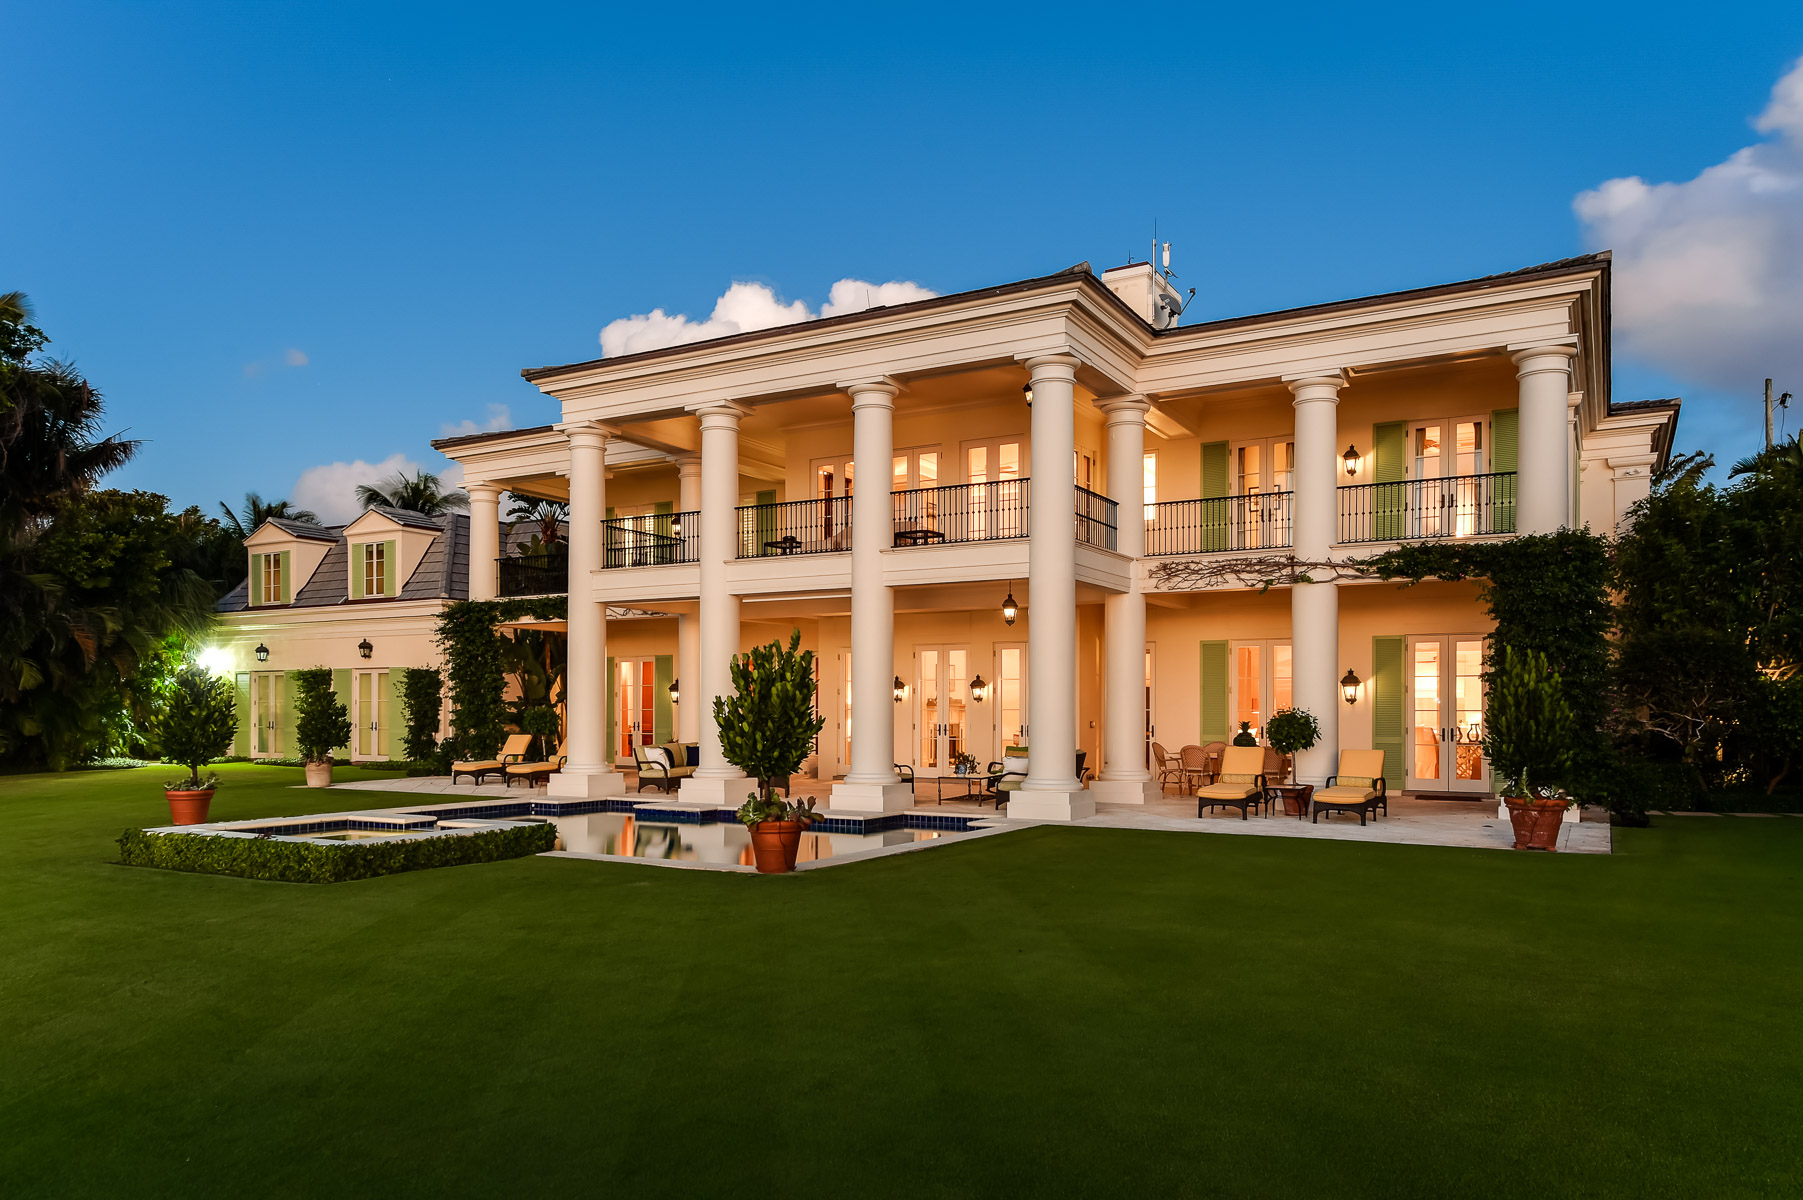 a large mansion in the middle of a lush green lawn.